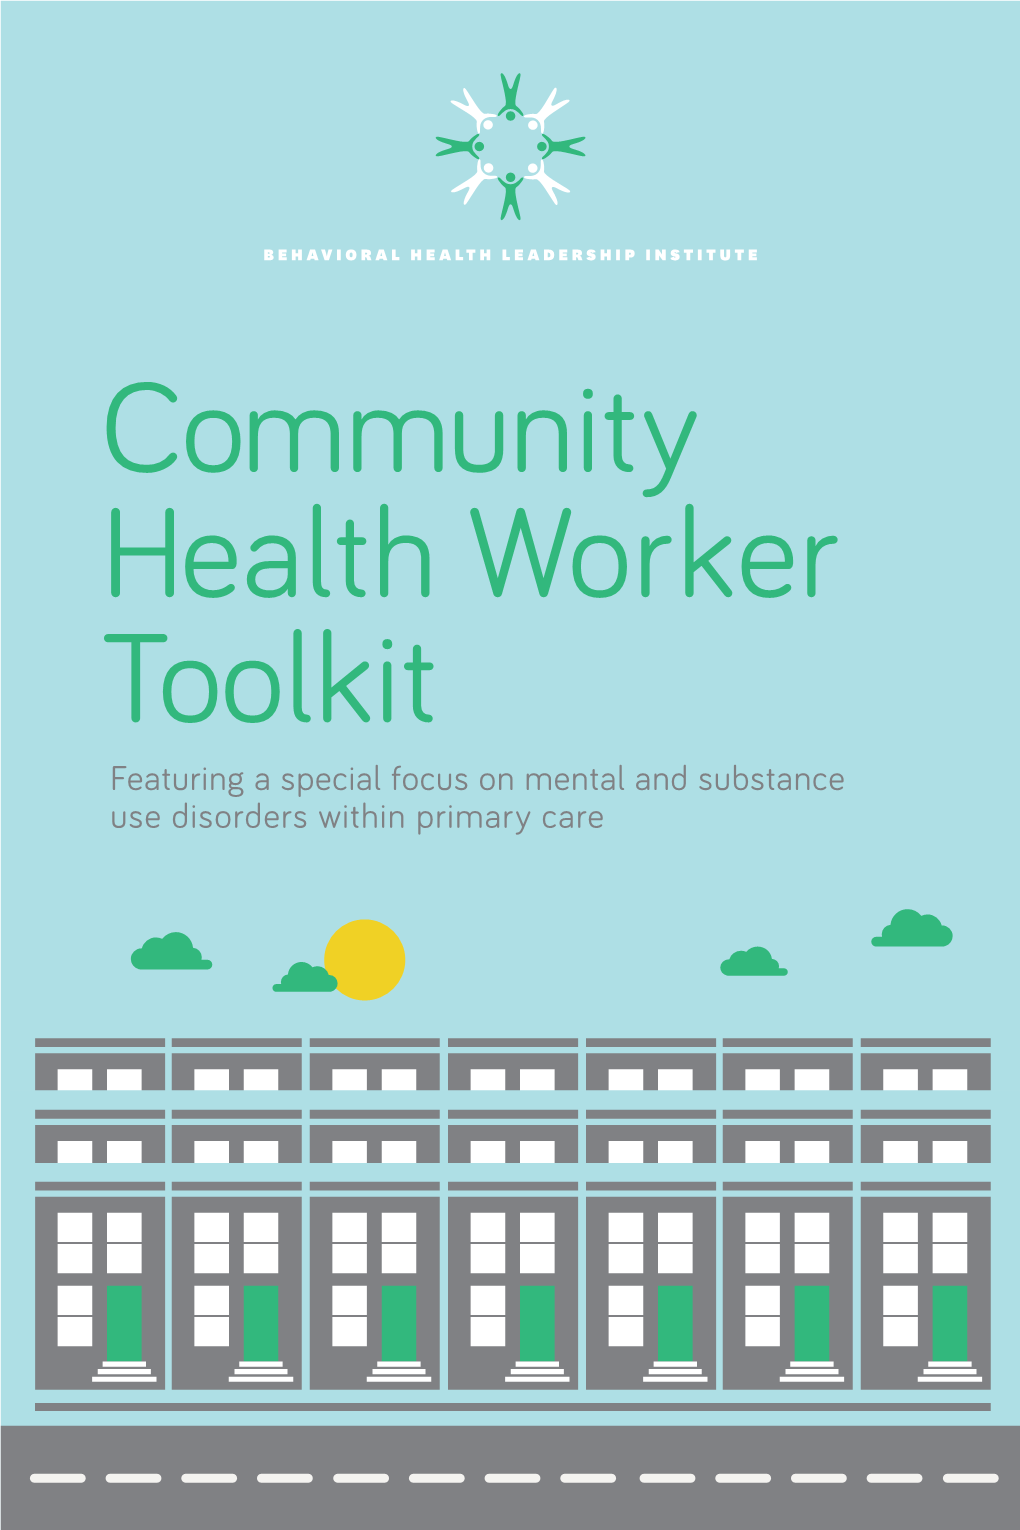 Community Health Worker Toolkit Featuring a Special Focus on Mental and Substance Use Disorders Within Primary Care 2 3